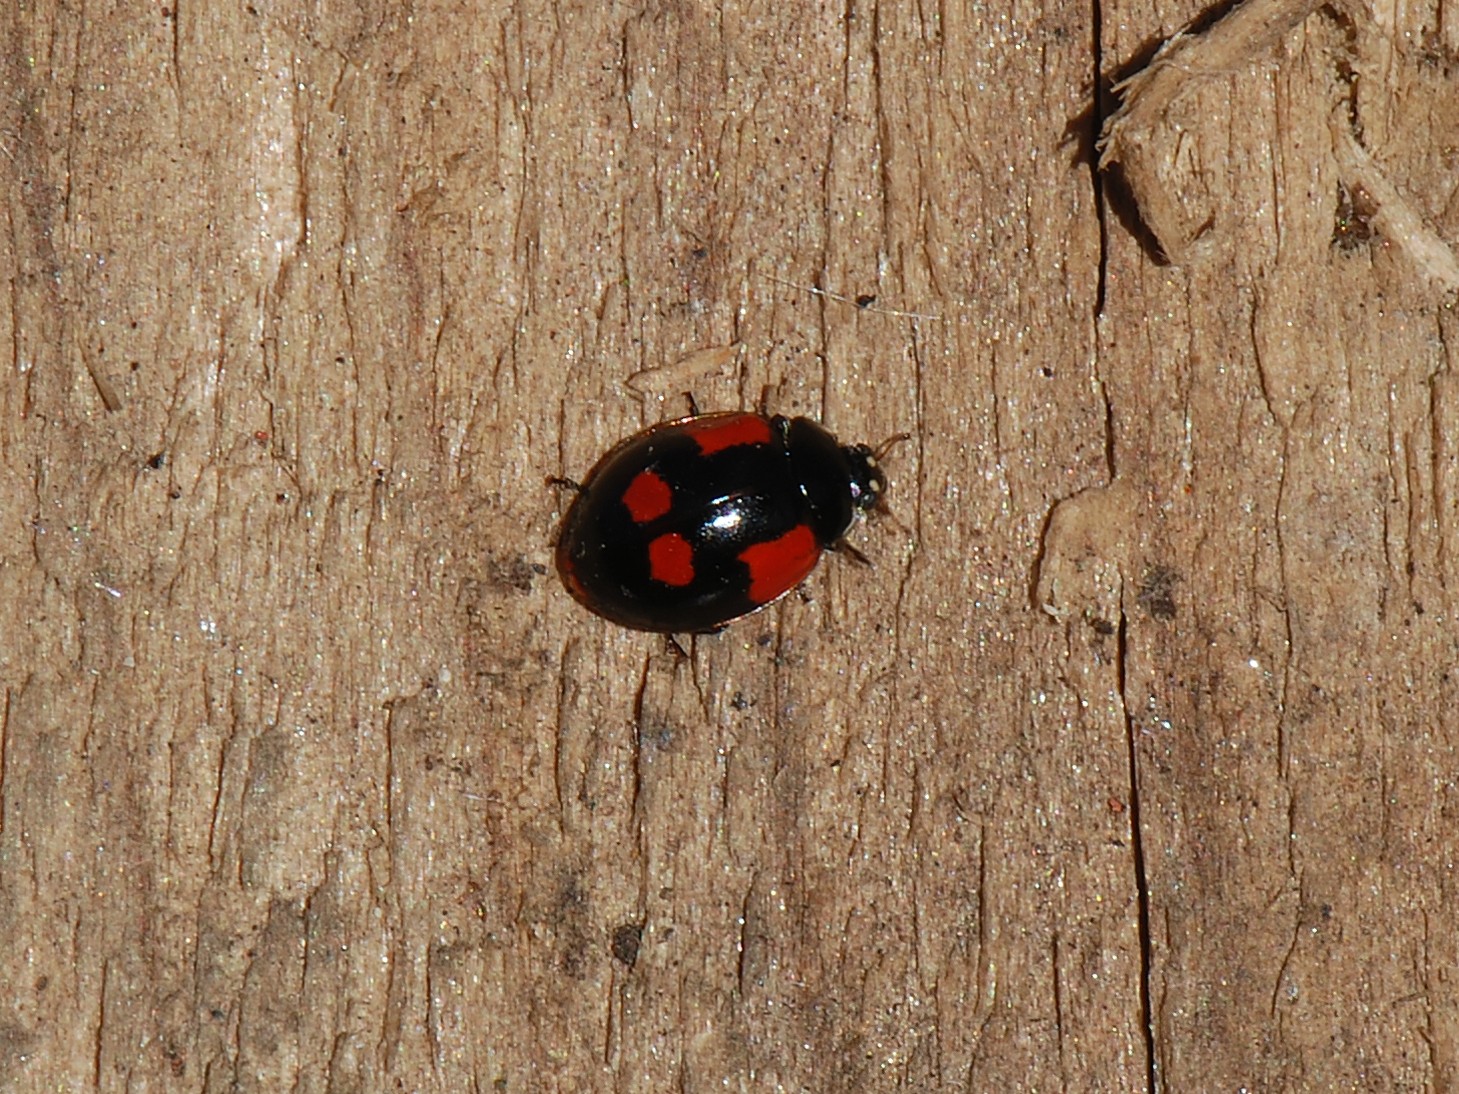 This is another colour form of the 2-spot Ladybird